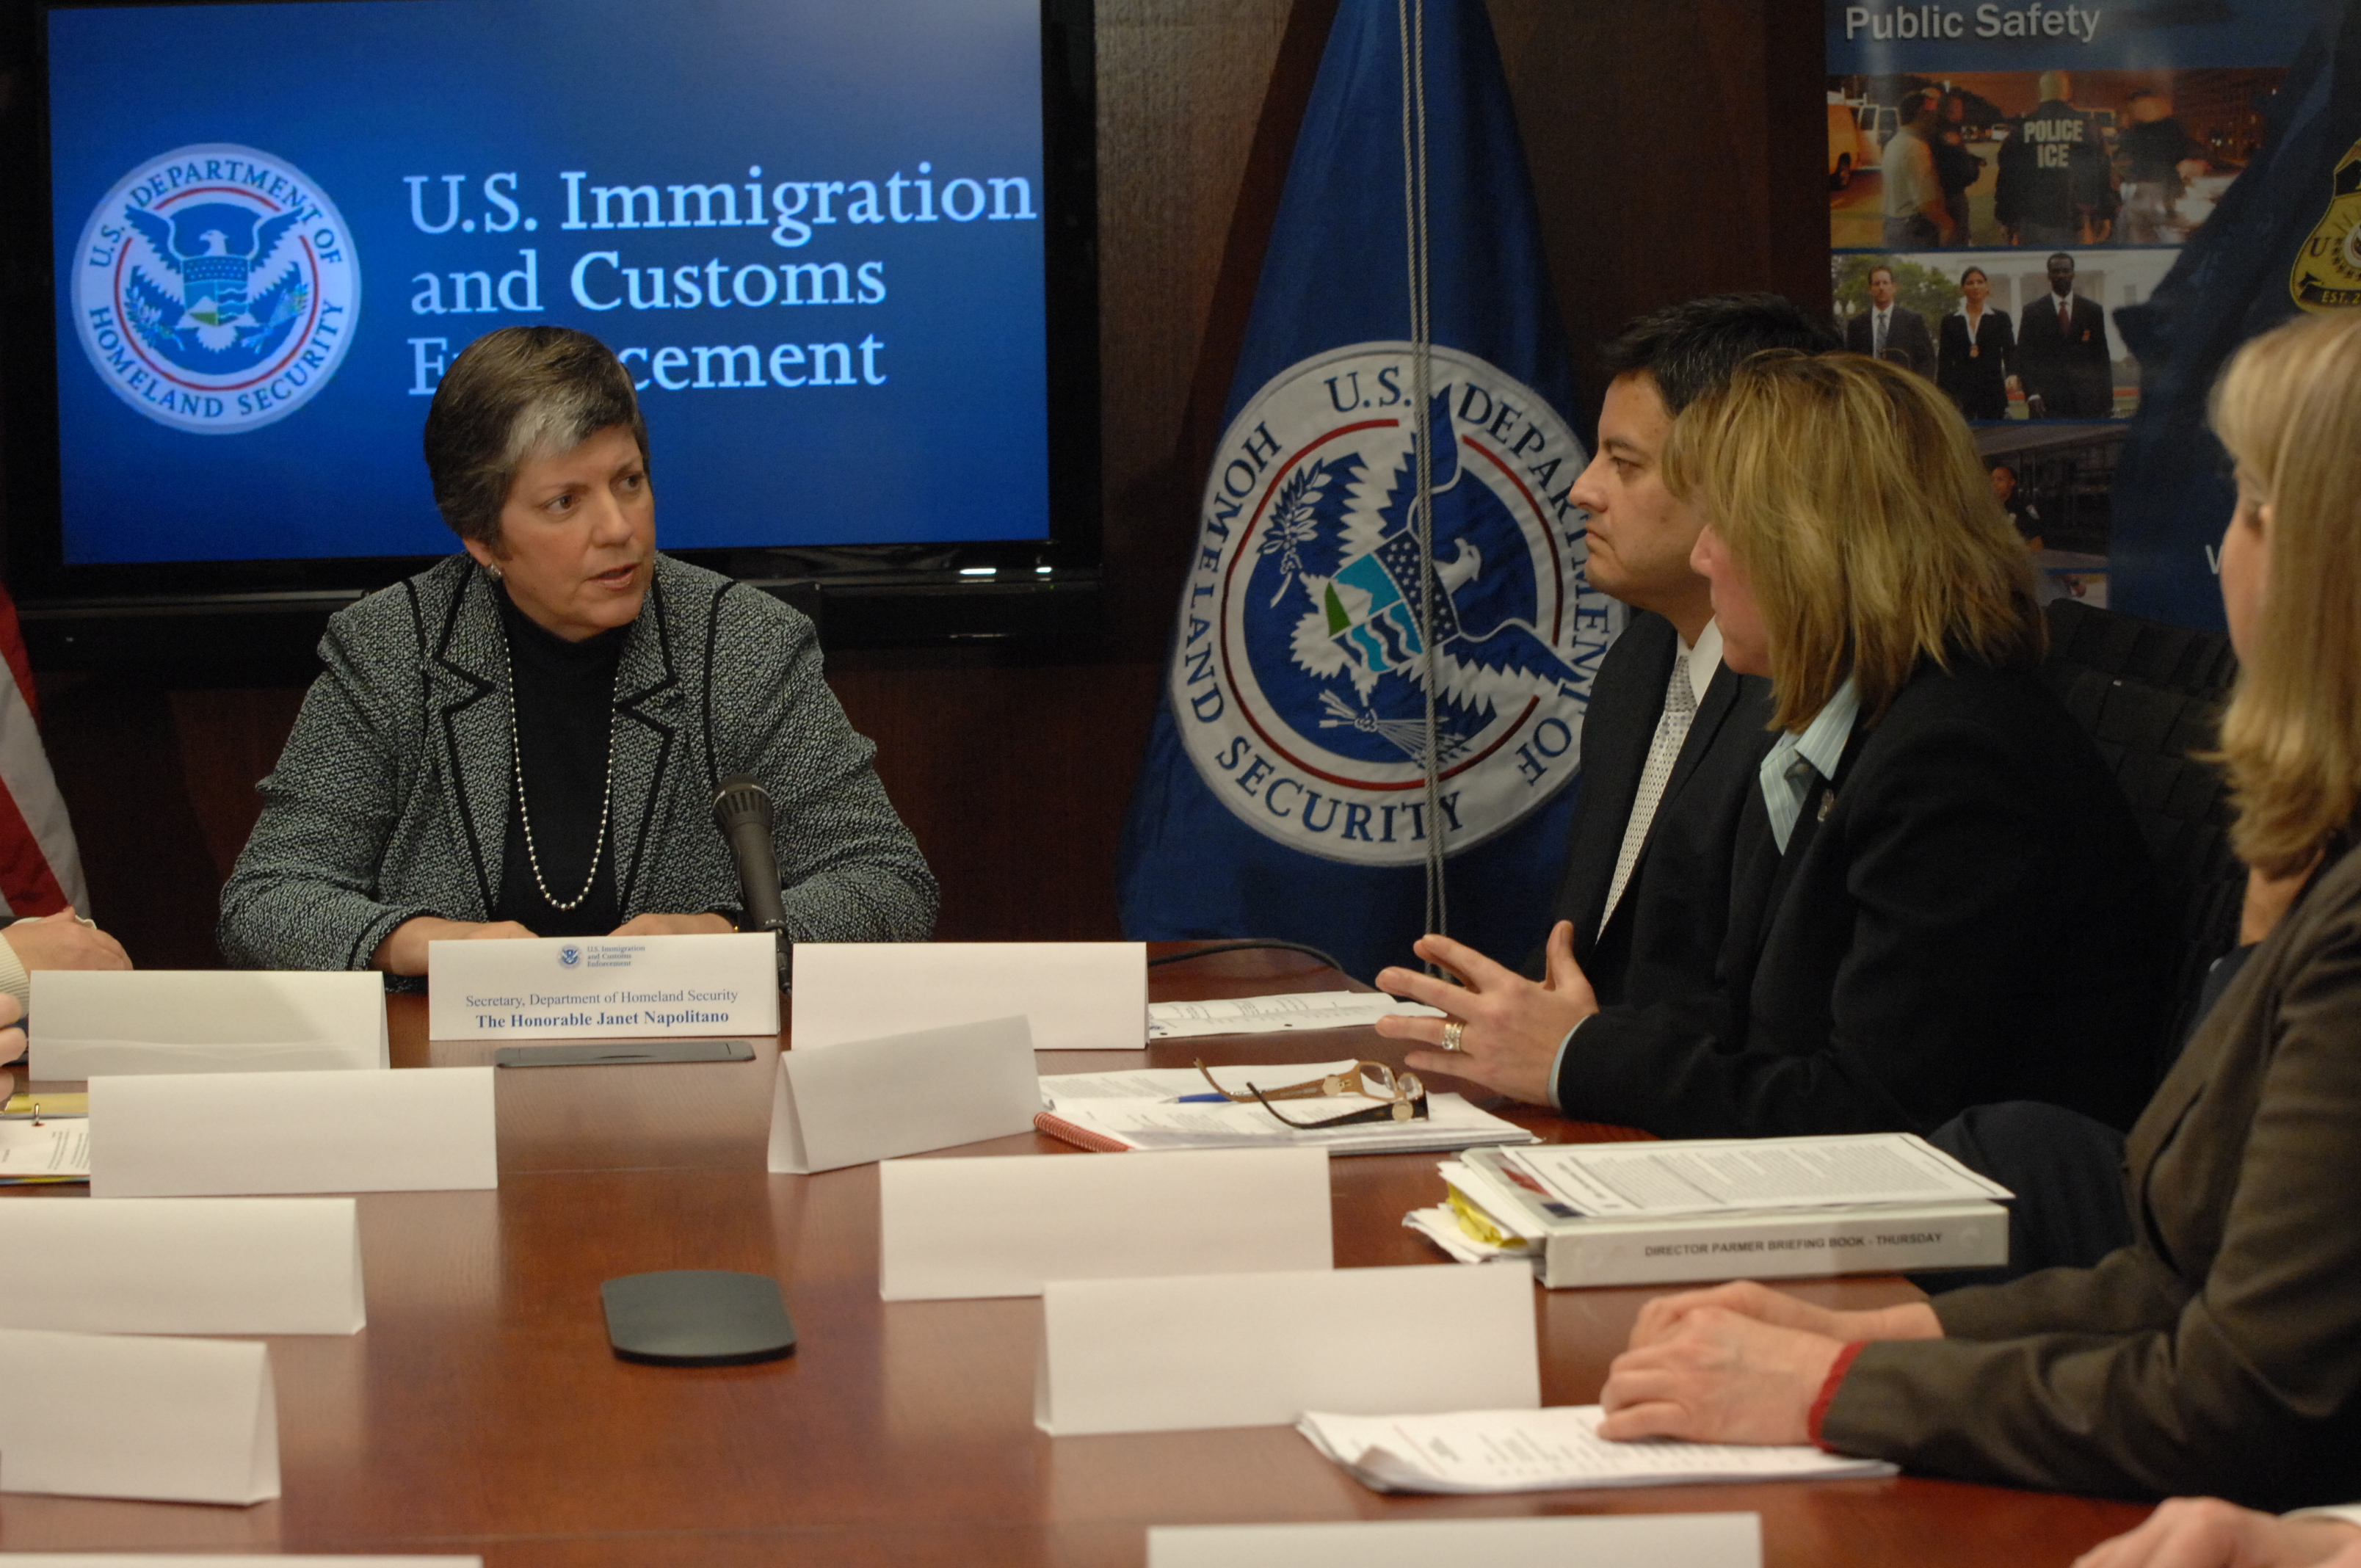 January 29, 2009 – Secretary of Homeland Security Janet Napolitano meets with senior leadership from U.S. Immigration and Customs Enforcement. Pictured are Secretary Napolitano; Acting Assistant Secretary John Torres; Marcy Forman, Director Office of Investigations; and Susan Lane, Director Office of Intelligence. (ICE Photo/Caffrey)